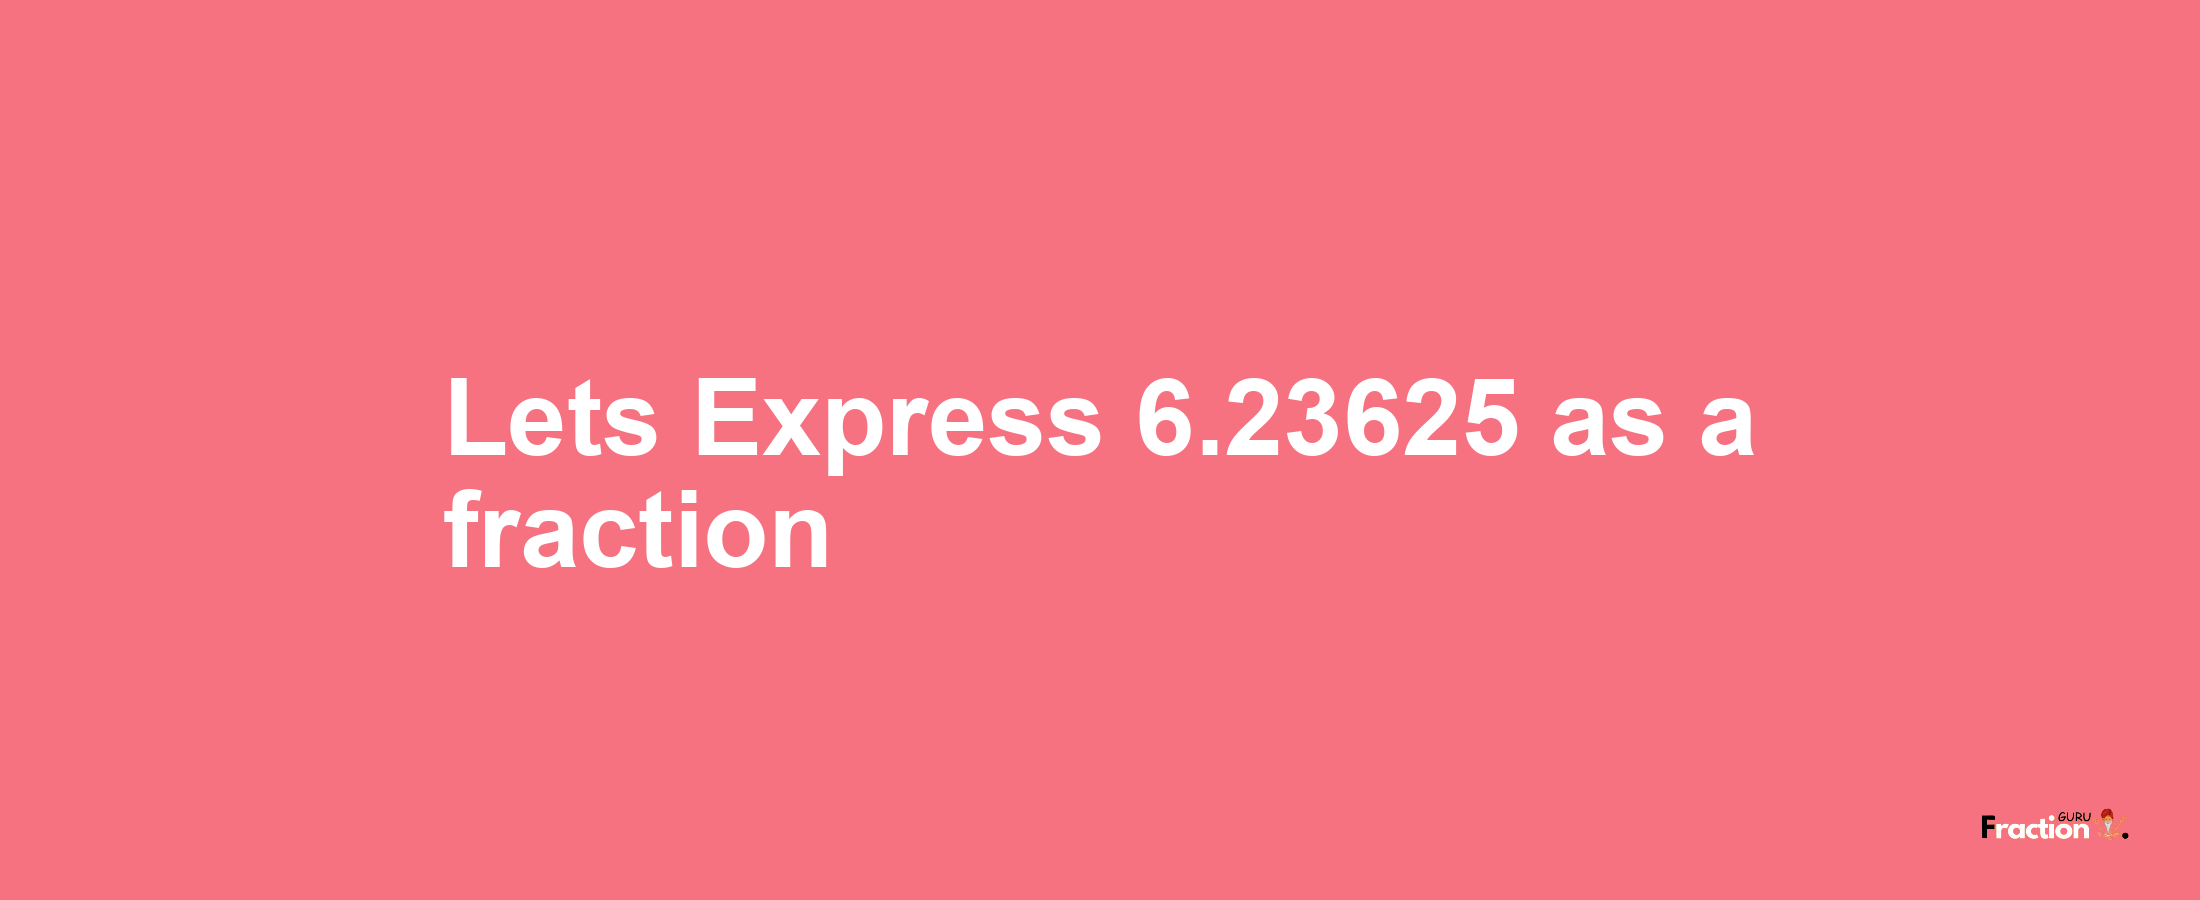 Lets Express 6.23625 as afraction